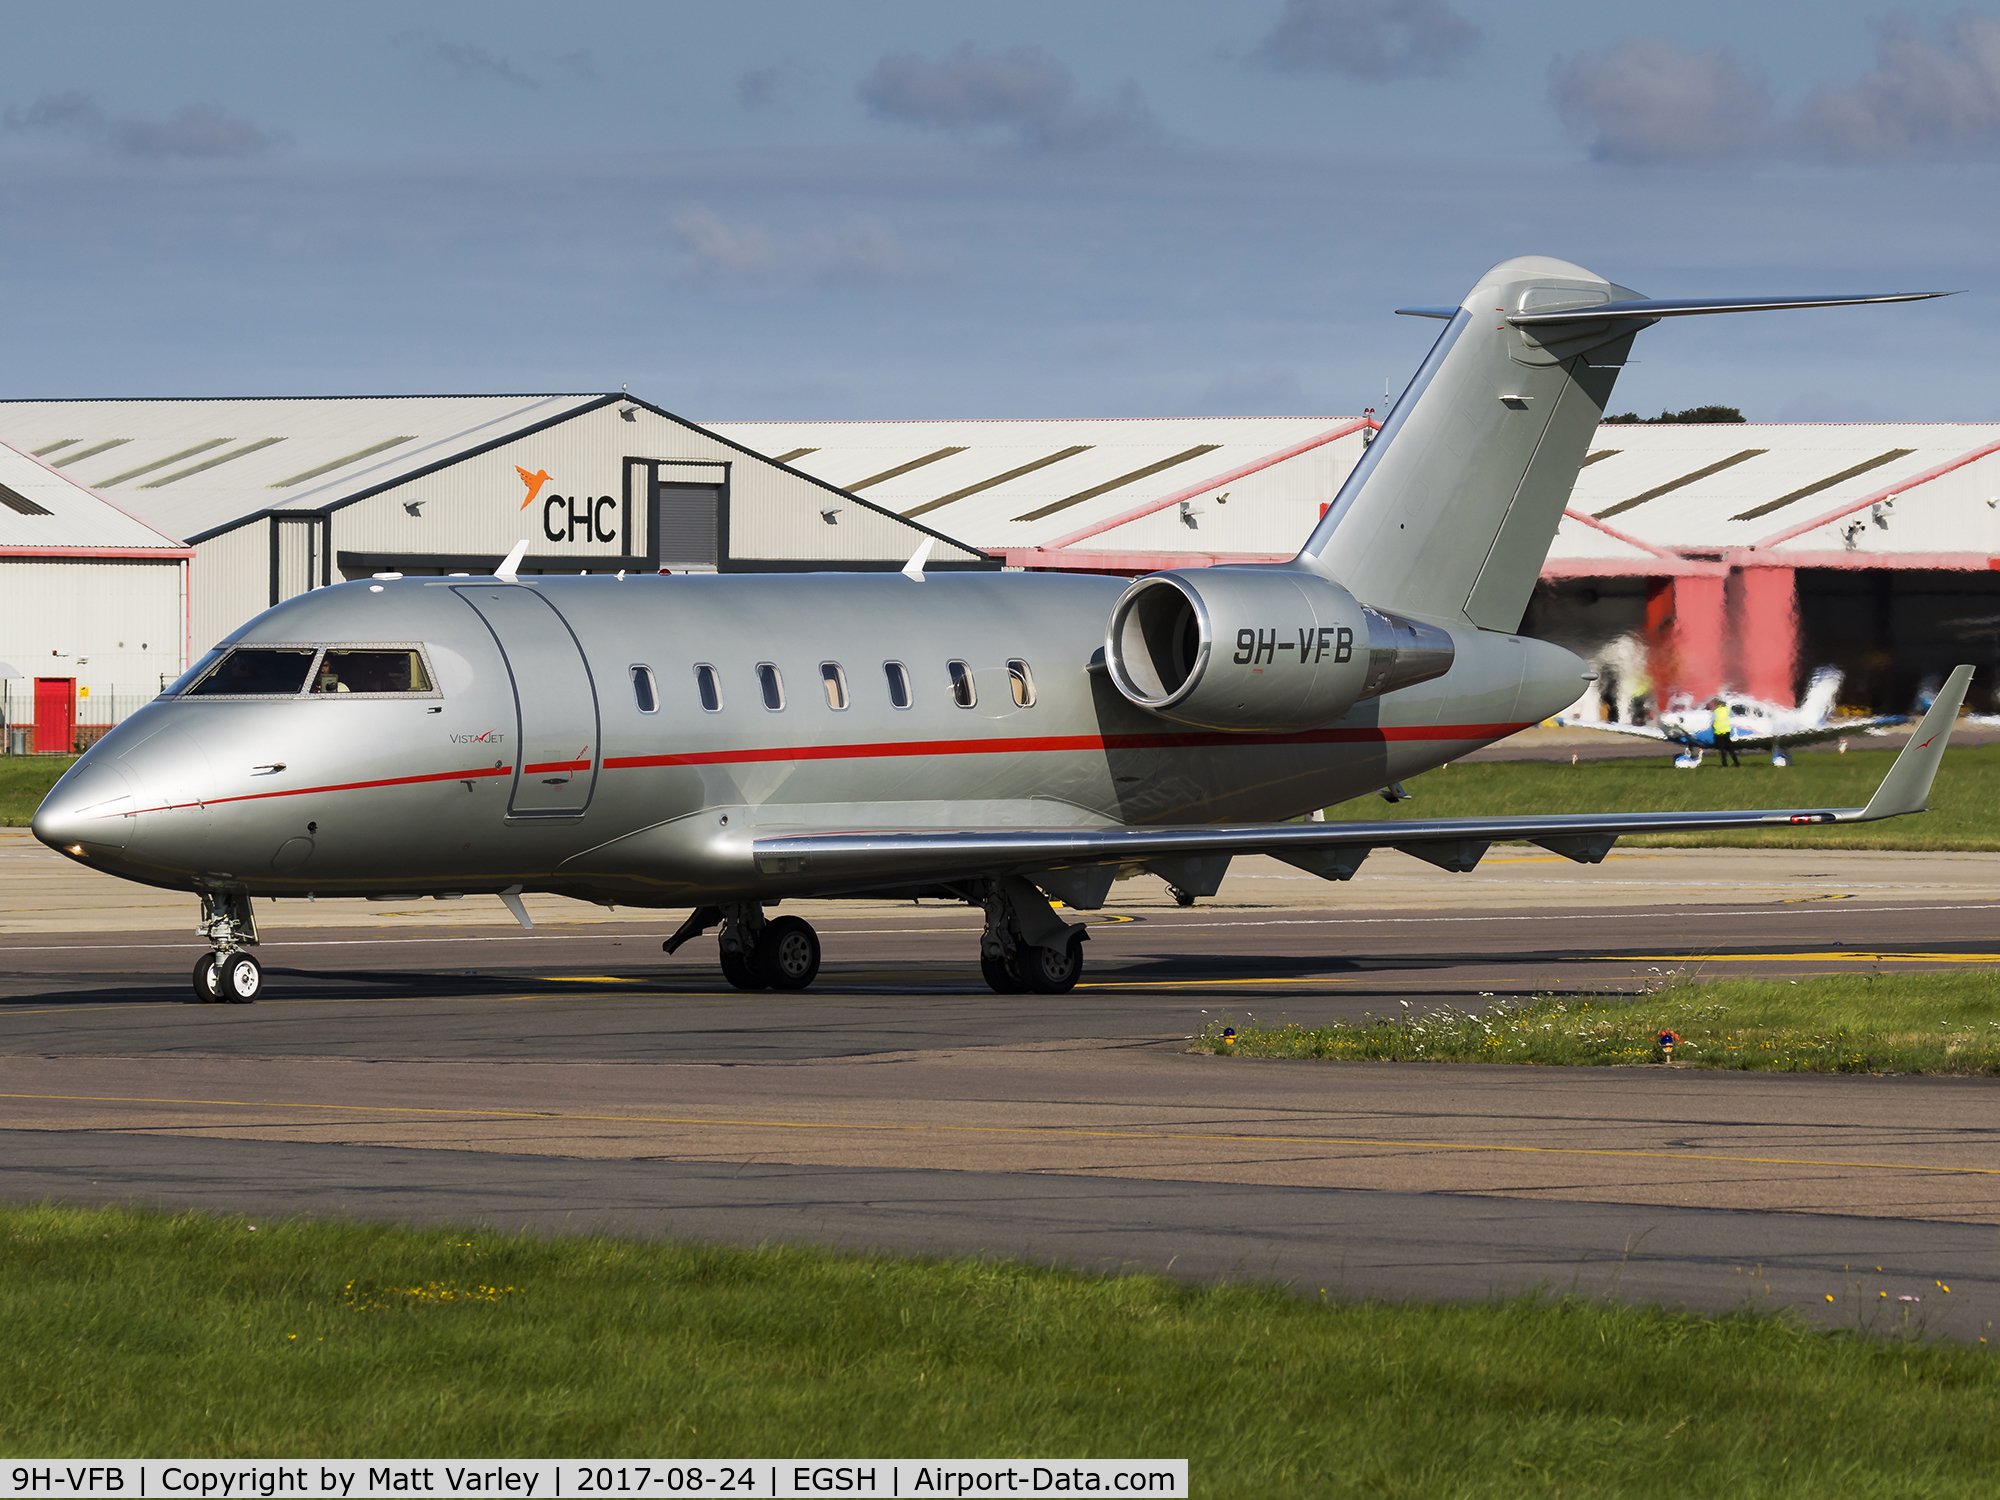 9H-VFB, 2014 Bombardier Challenger 604 (CL-600-2B16) C/N 5971, taxiing